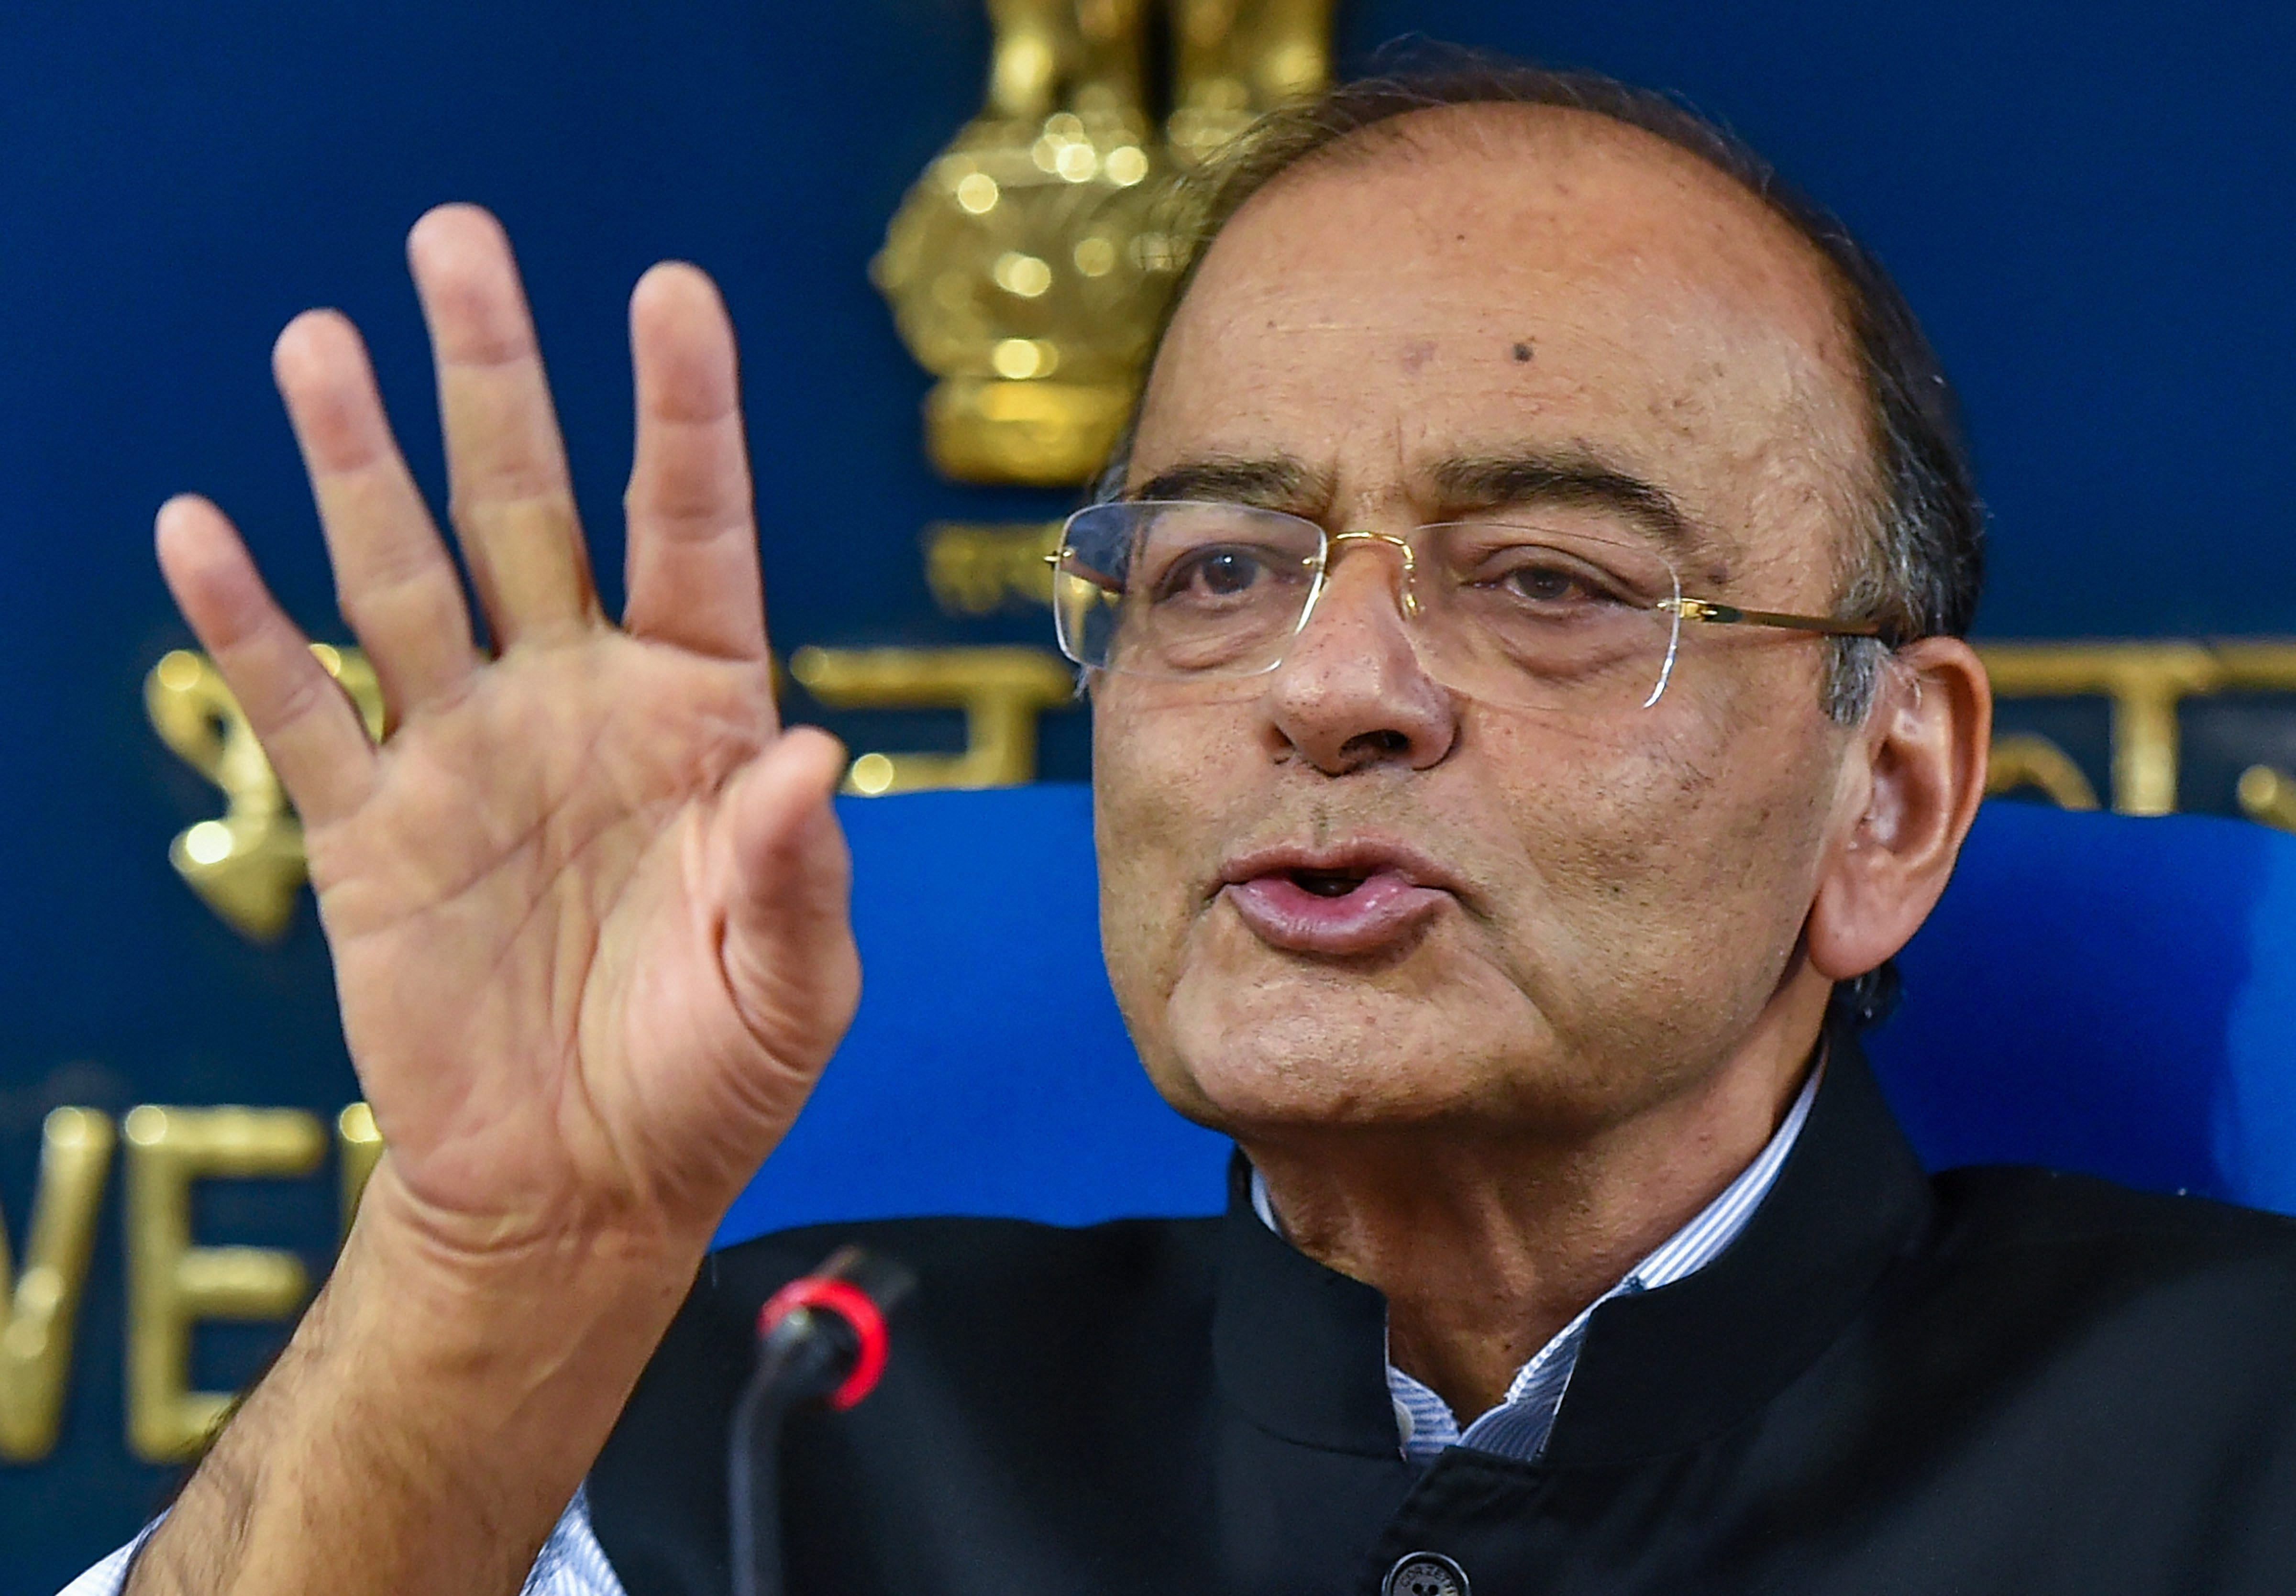 Finance Minister Arun Jaitley dismissed Congress President Rahul Gandhi's allegations of involving Anil Ambani's company in the Rafale deal. 